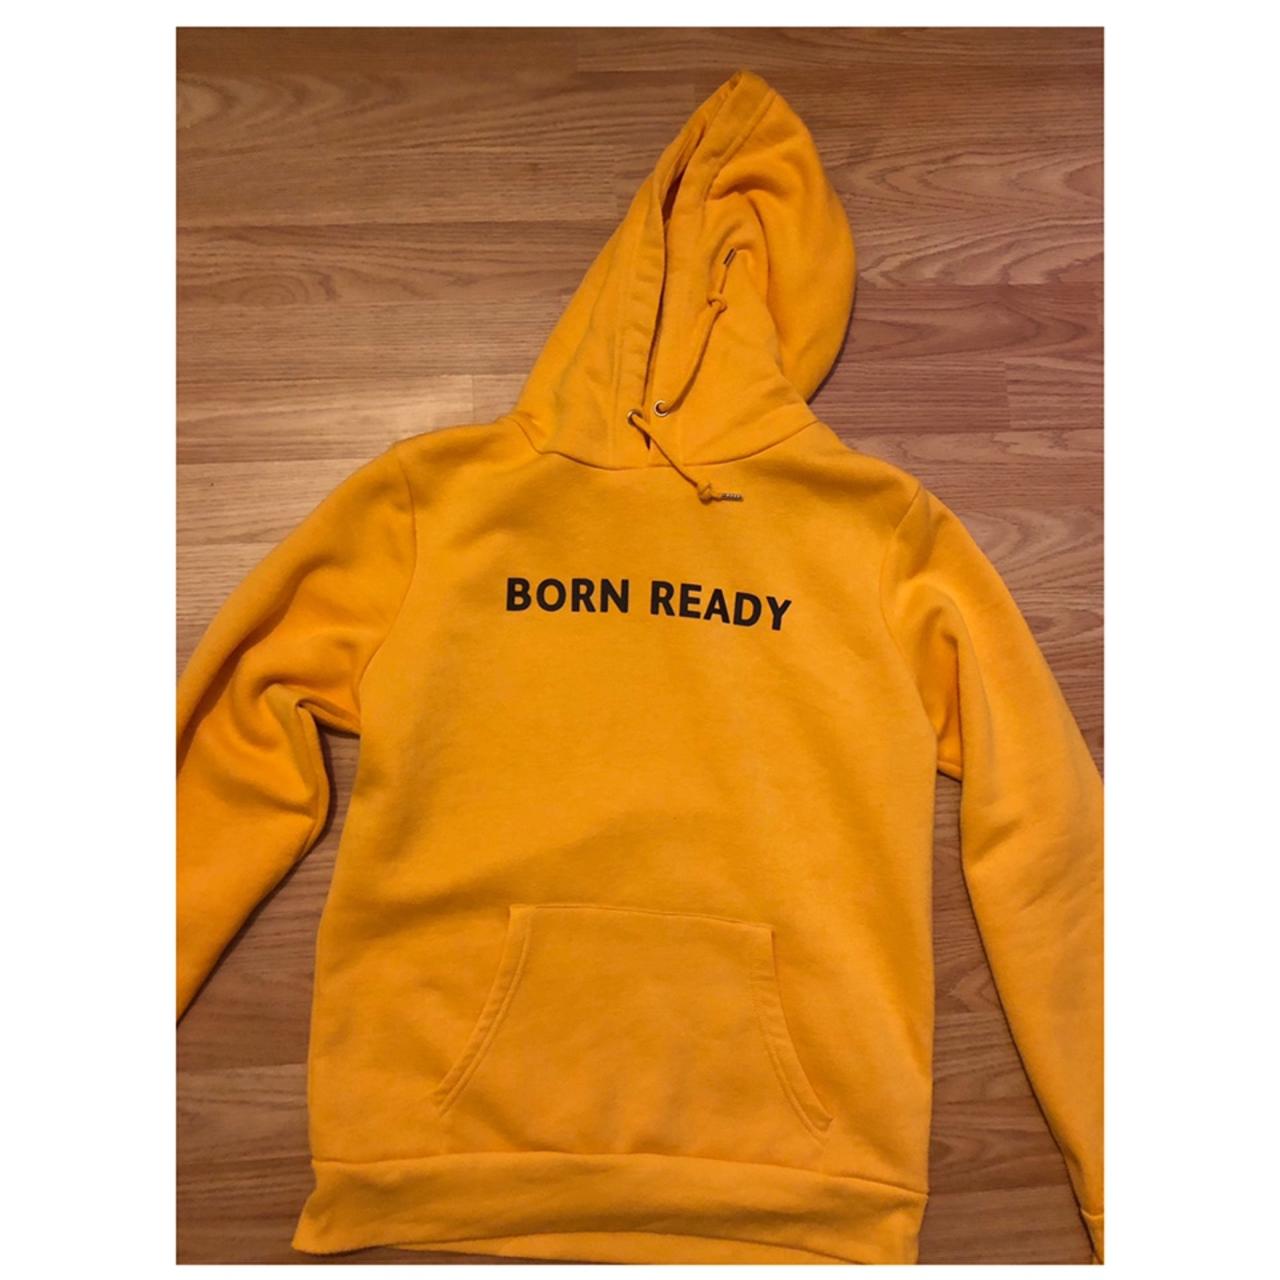 Born ready yellow hoodie Primark size small (would... - Depop